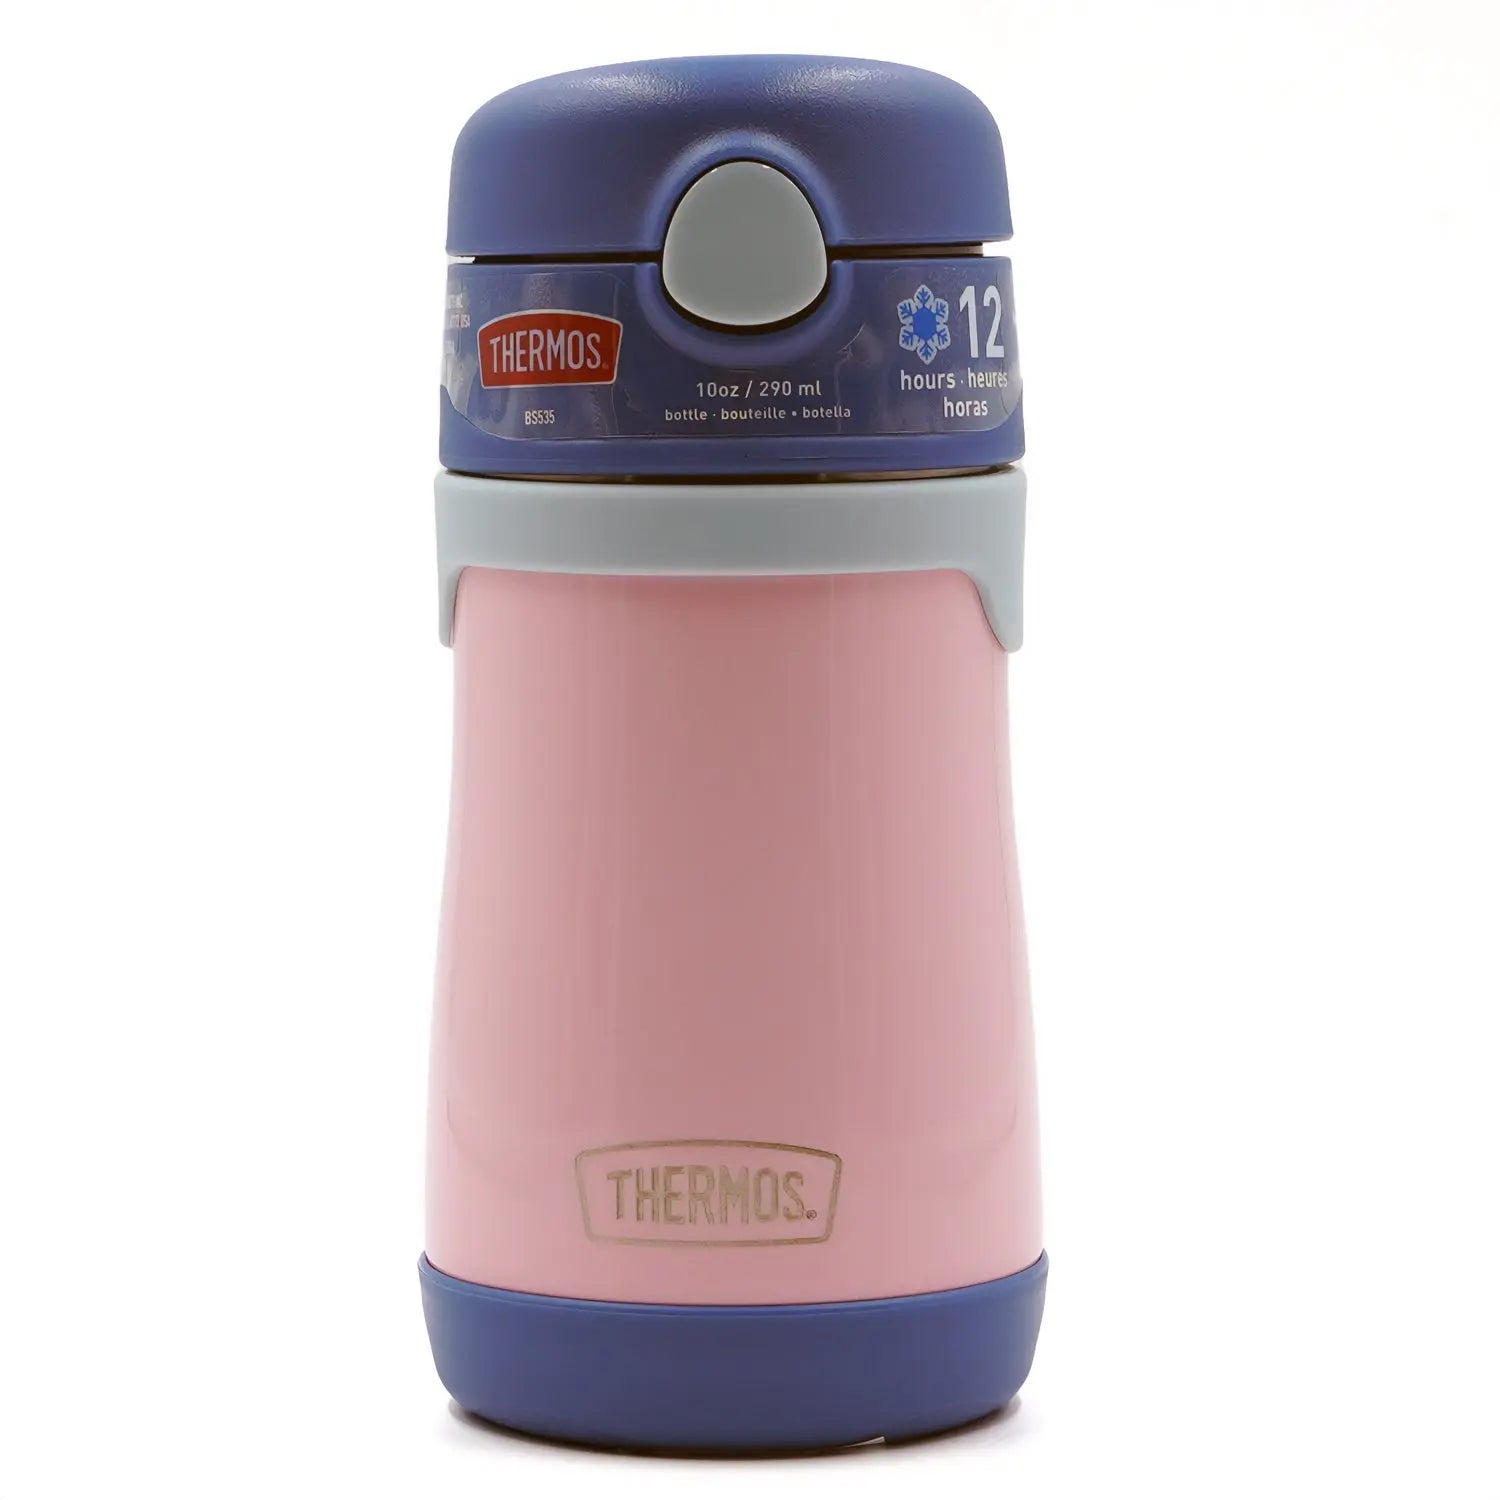 Thermos 10 oz. Kid's Vacuum Insulated Stainless Steel Straw Water Bottle - Pink Thermos